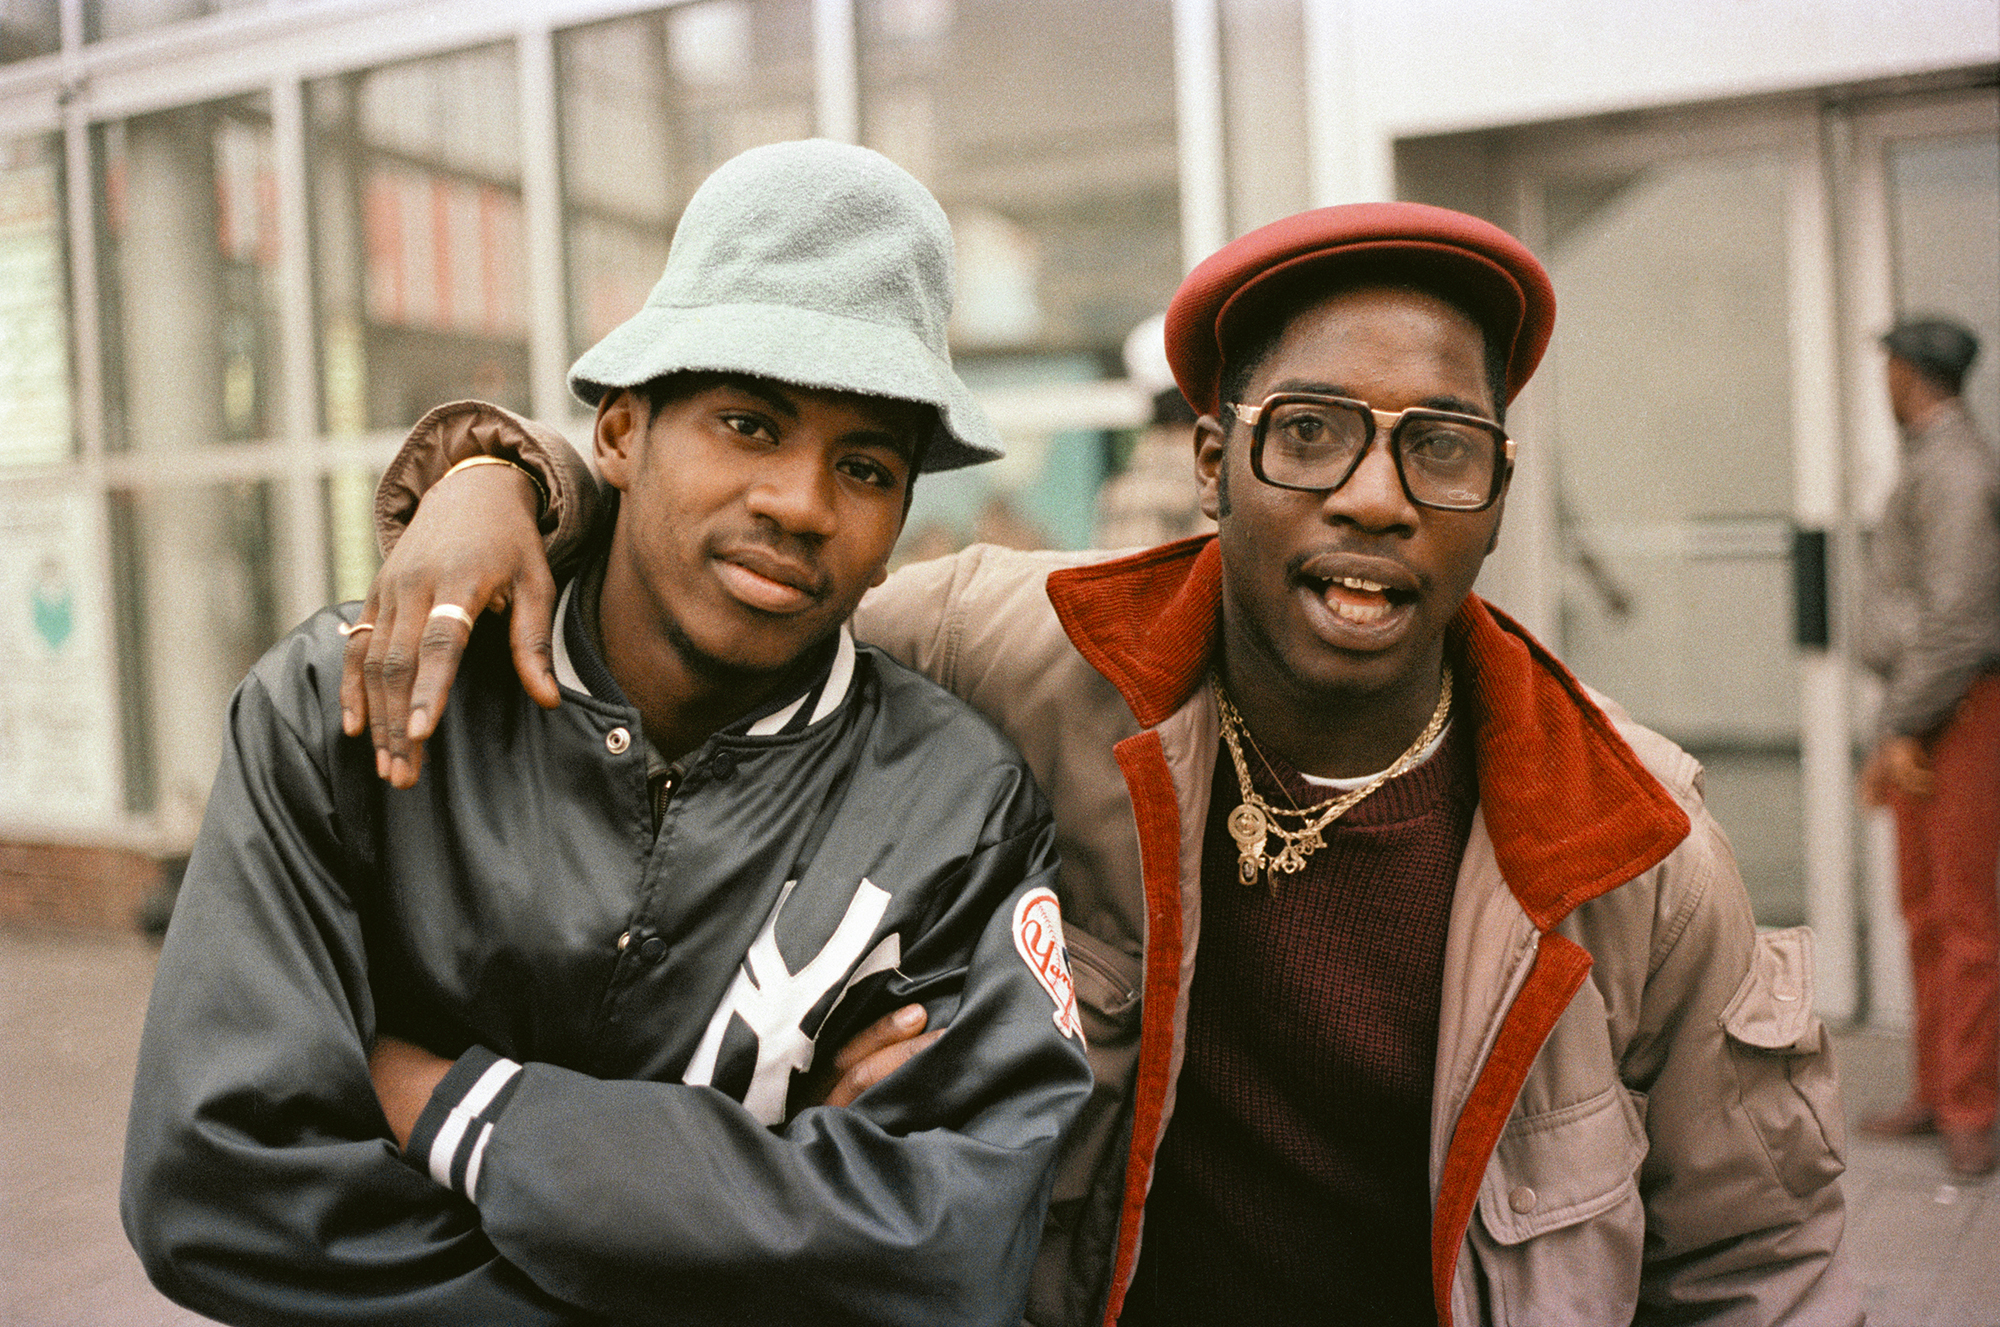 Rolling Partners, Downtown Brooklyn, NYC, 1982. Photograph by Jamel Shabazz. This image illustrates the Cazal entry in The Men's Fashion Book